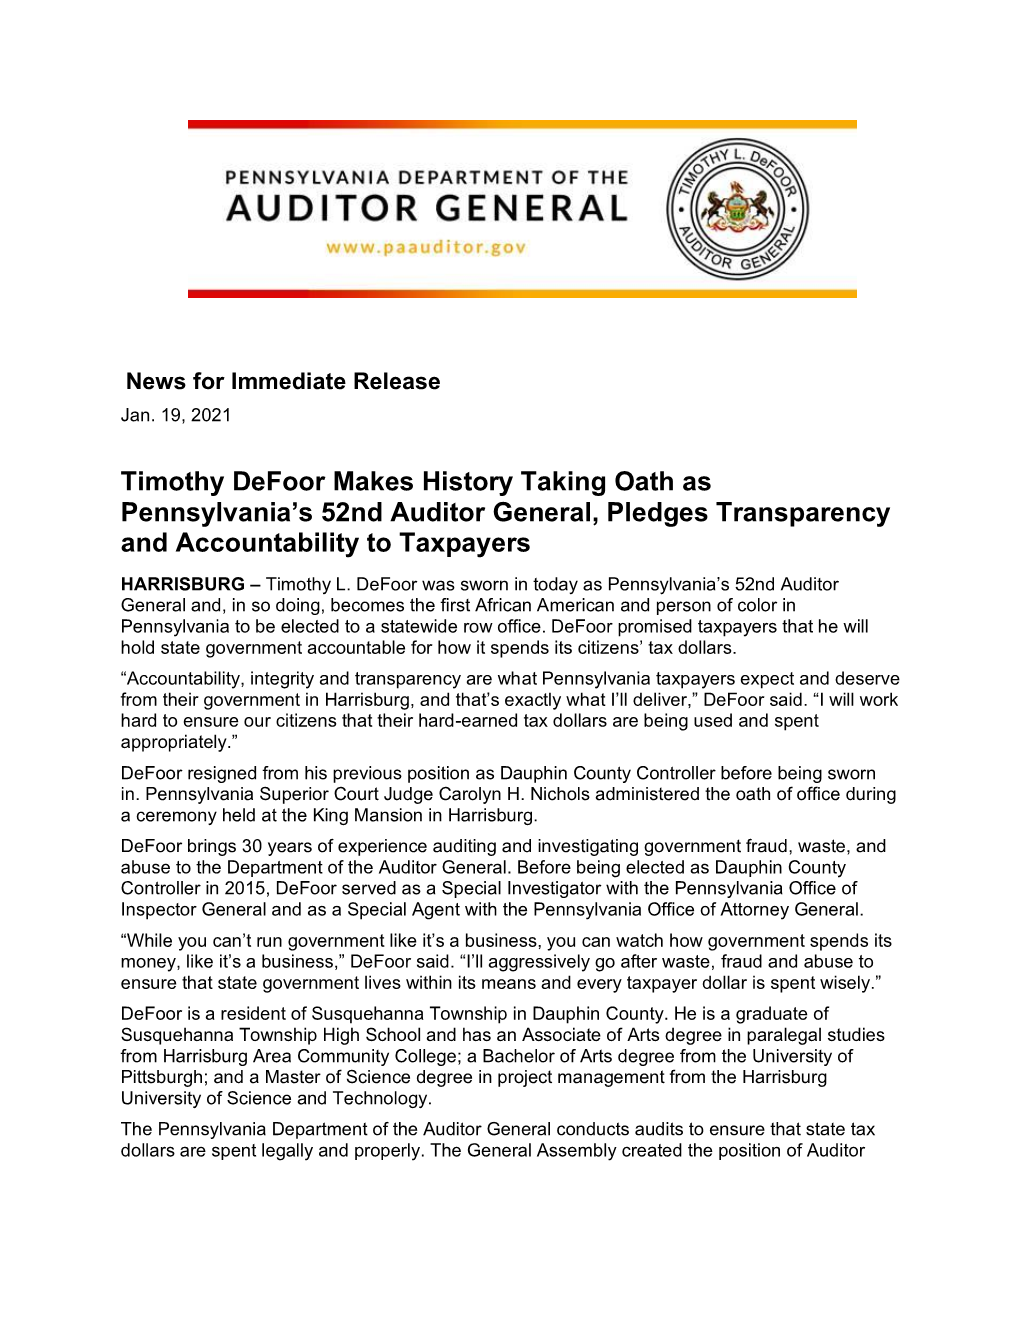 Timothy Defoor Makes History Taking Oath As Pennsylvania's 52Nd Auditor General, Pledges Transparency and Accountability to Ta